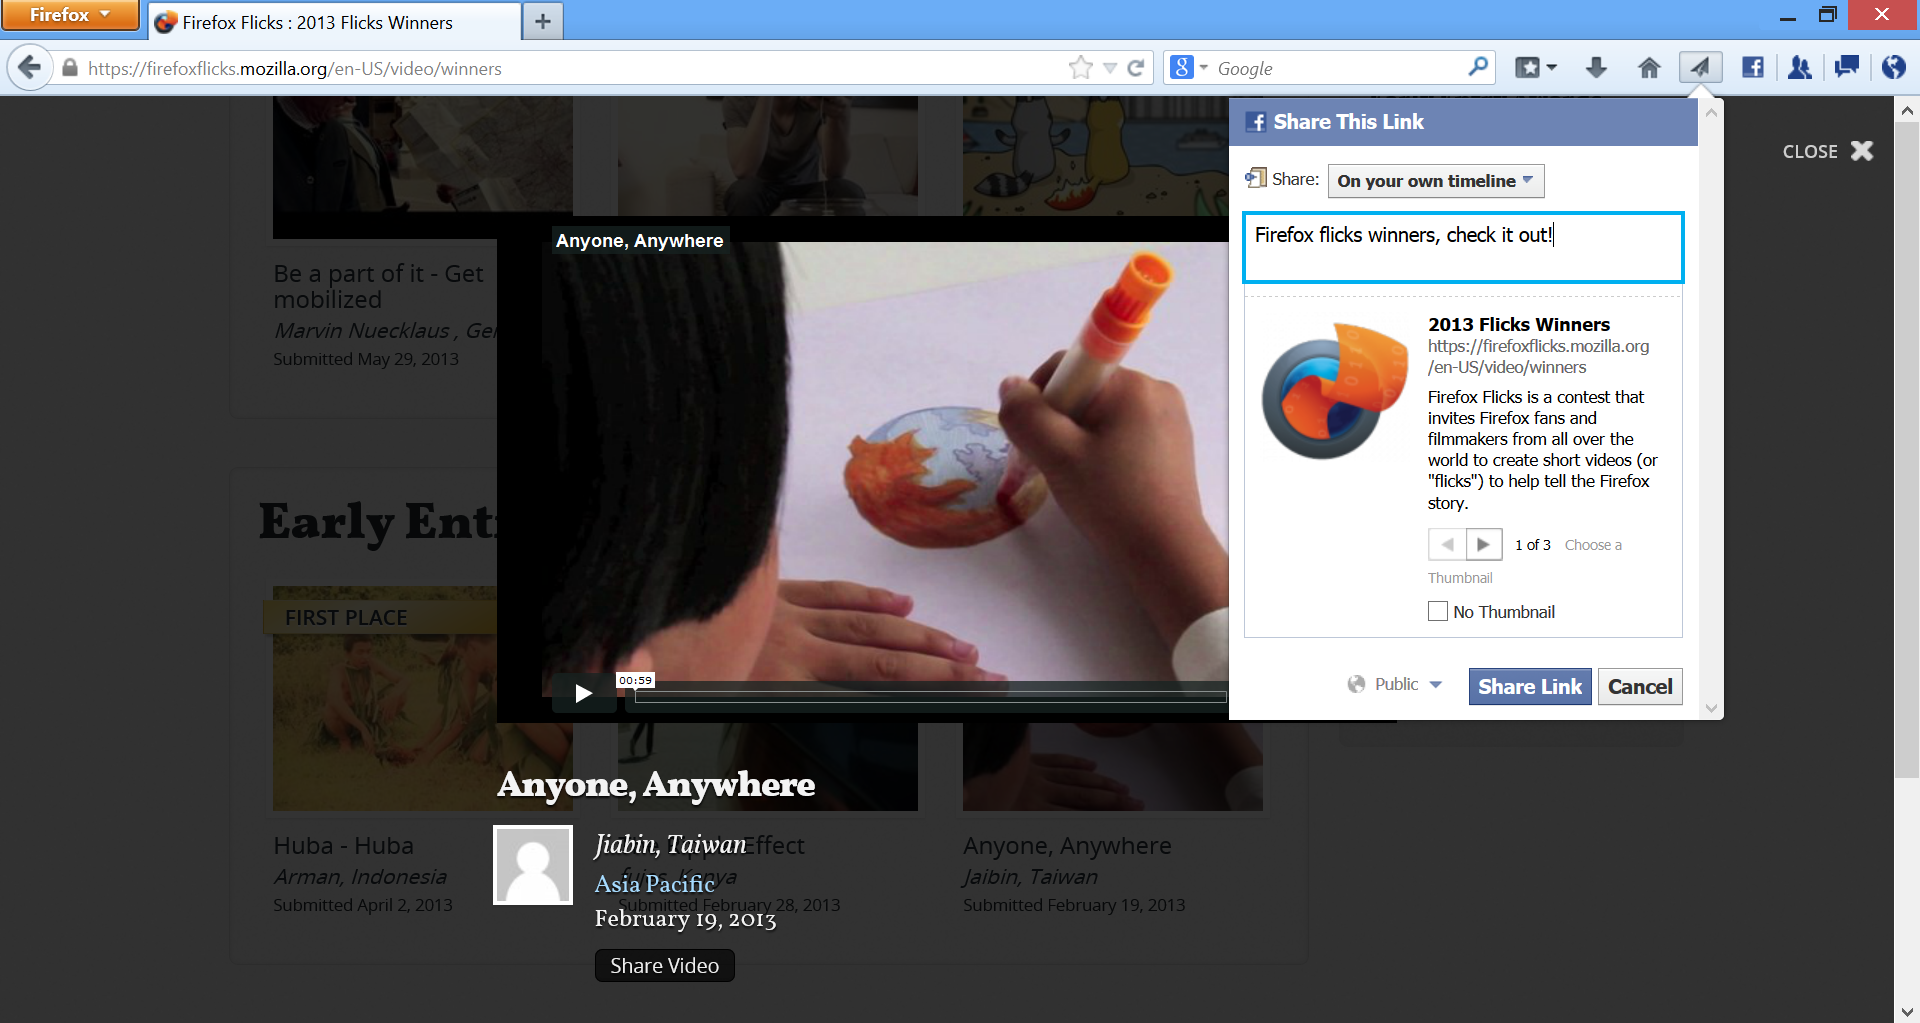 firefox 23 launches bringing share button and security features to desktop and updates for android too image 1